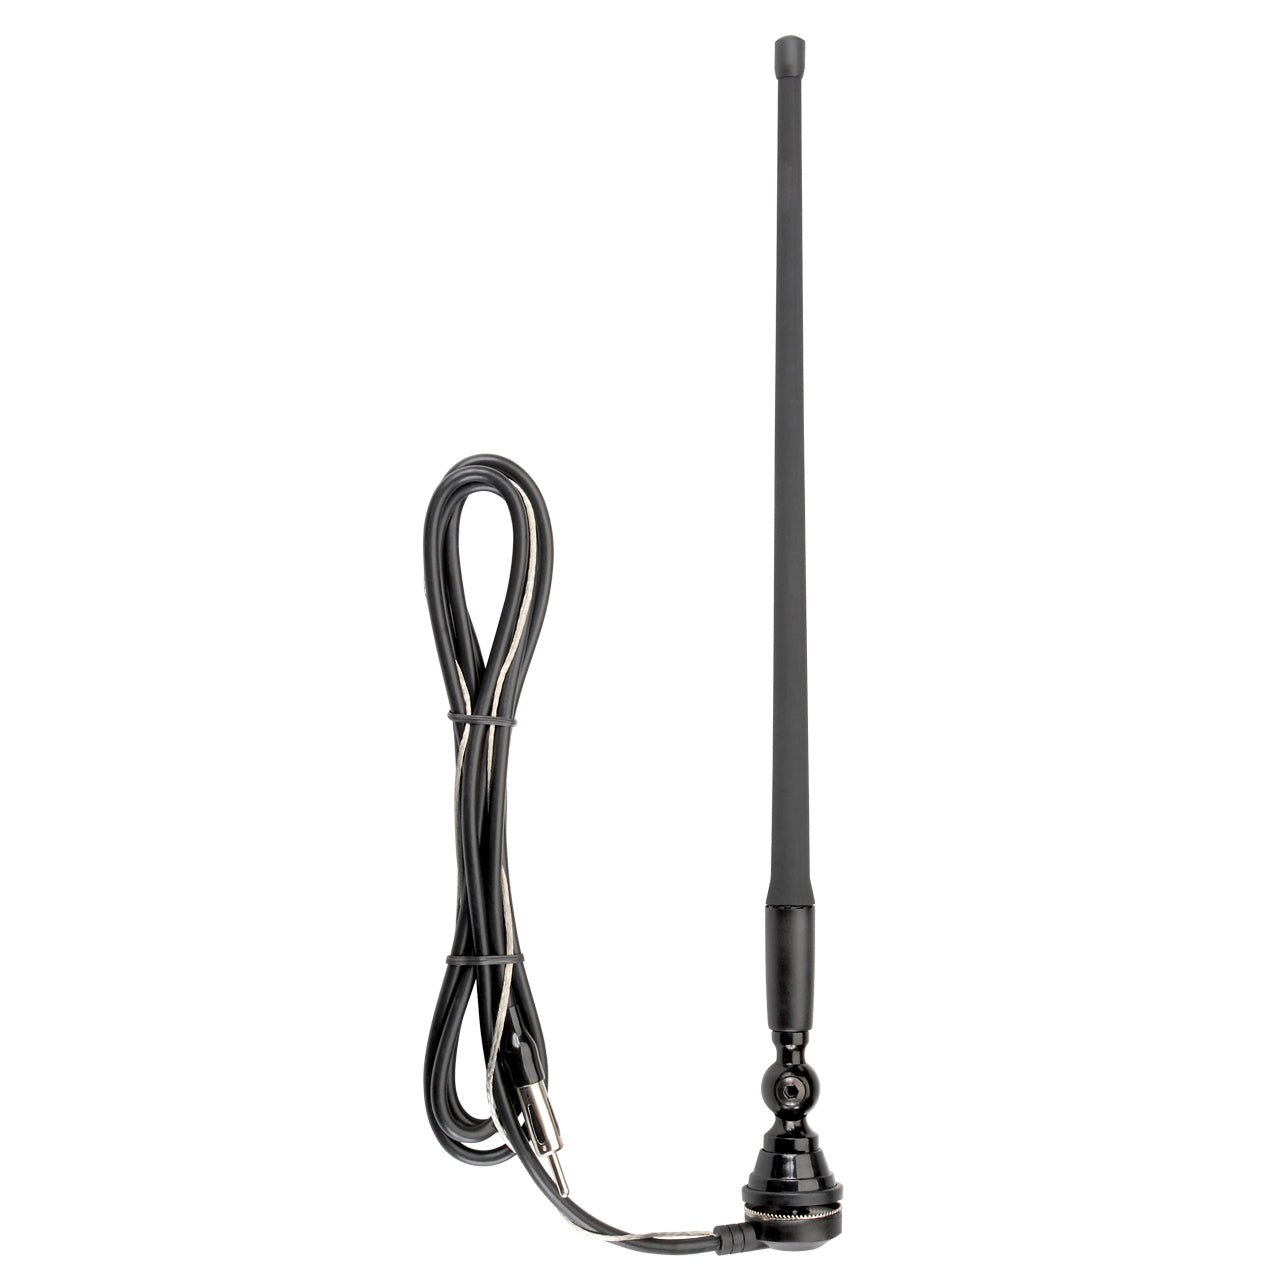 RV AM/FM Rubber Mast Antenna with 72 Cable